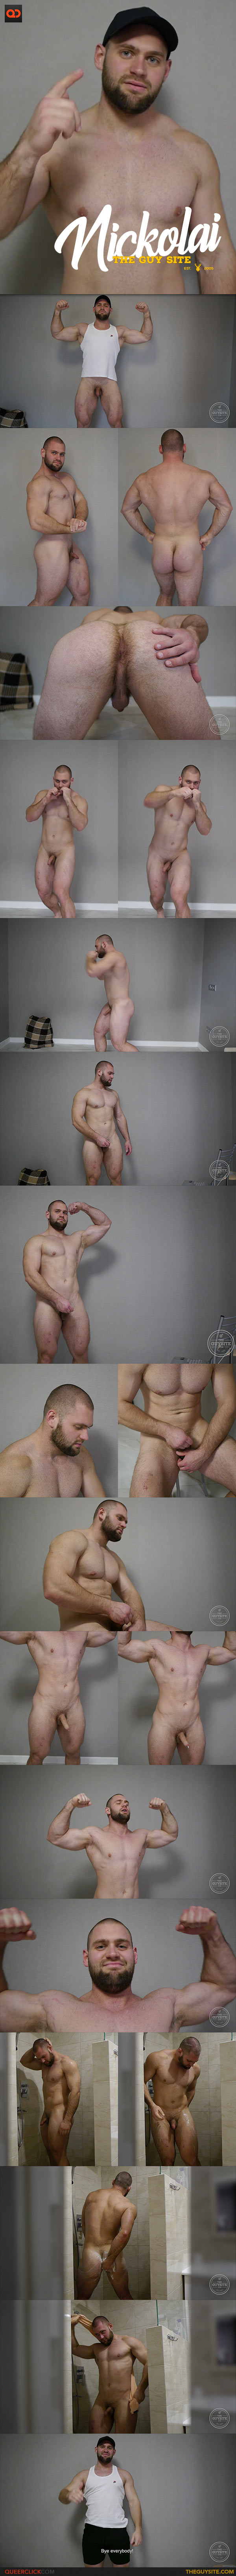 The Guy Site: Nickolai - Big Naked Man From Russia